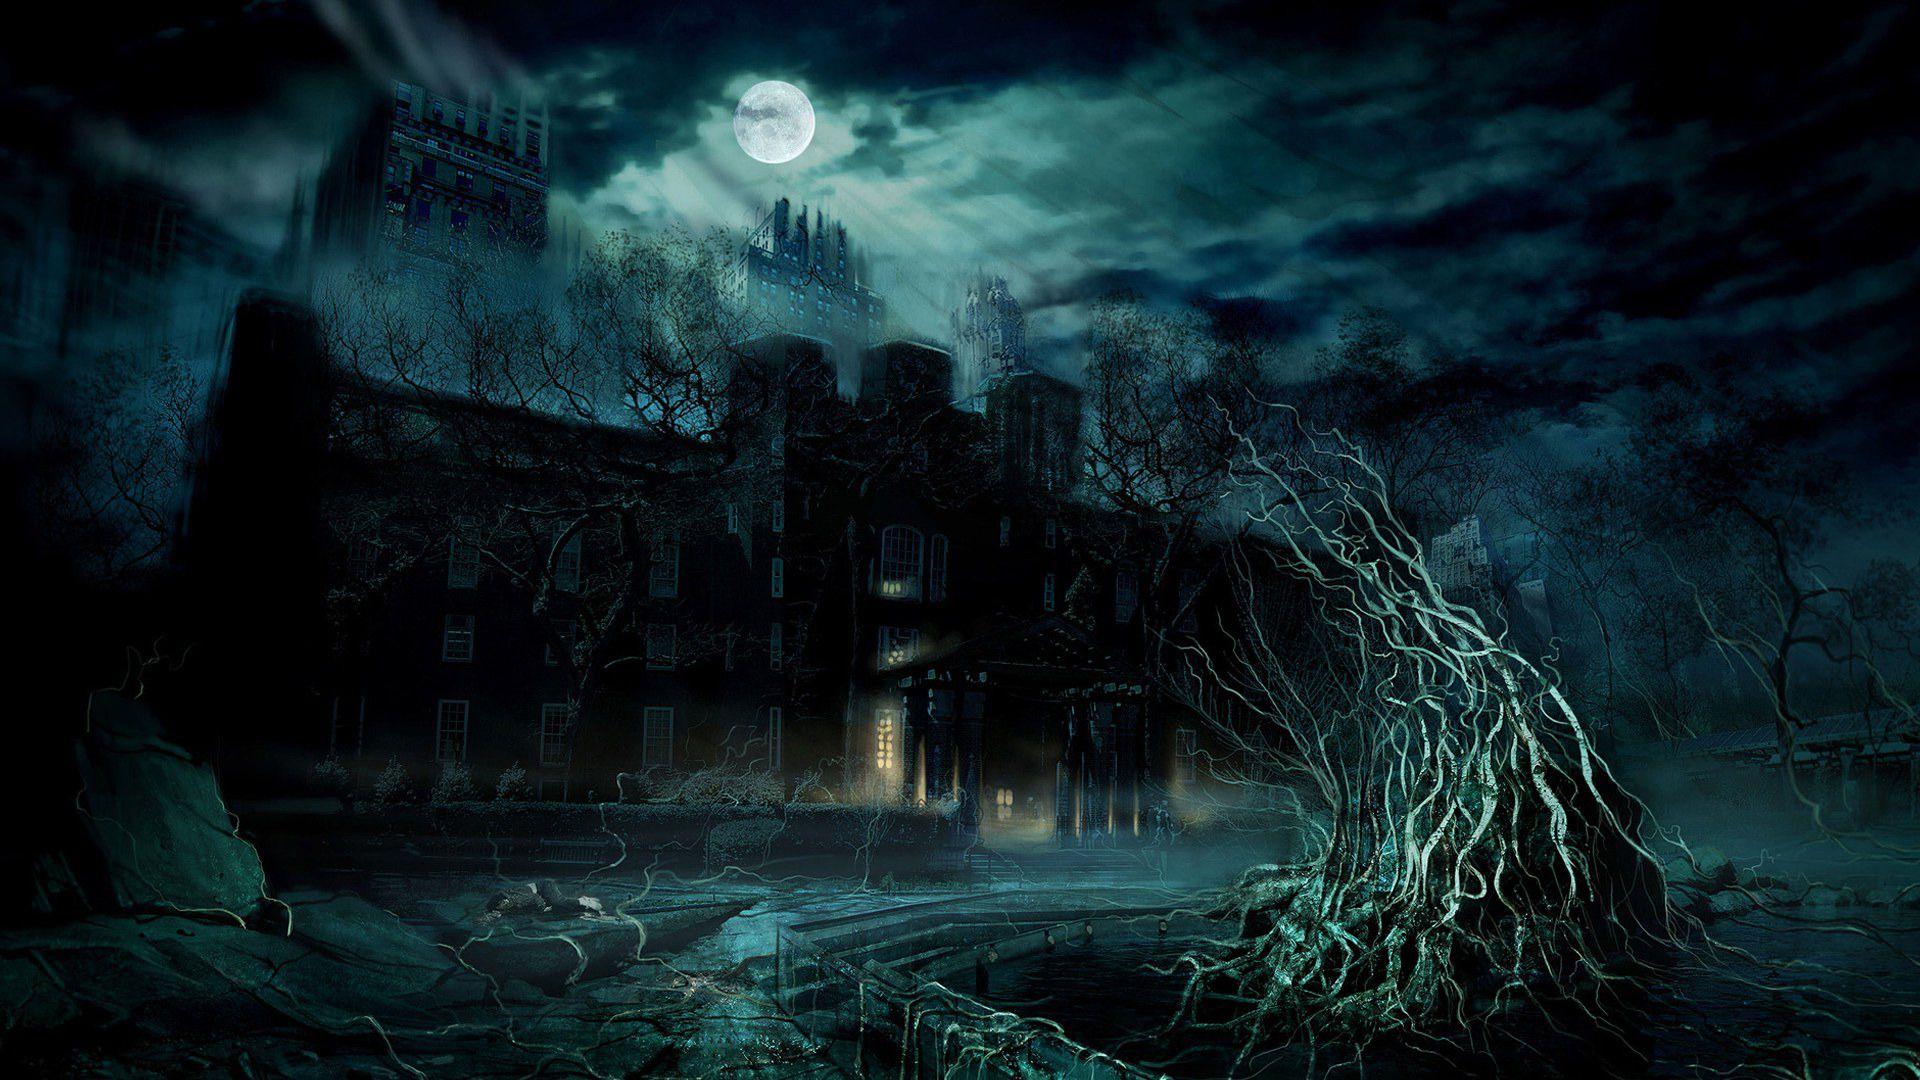 Scary Castle Wallpapers - Top Free Scary Castle Backgrounds ...